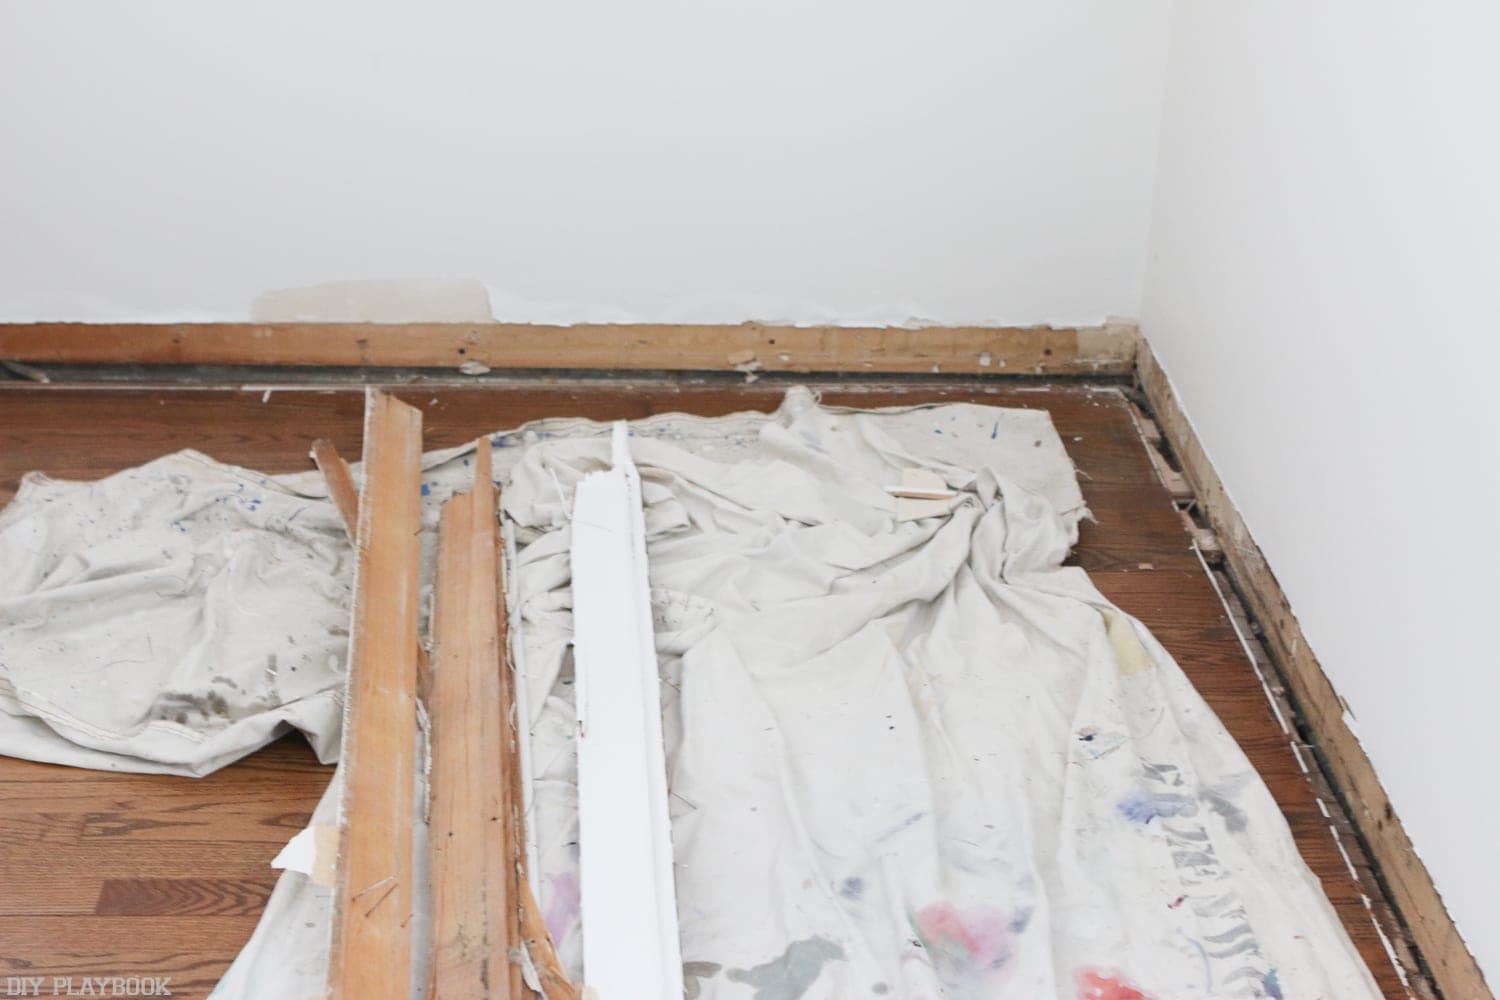 Once the baseboard is removed, you'll be ready for the next step